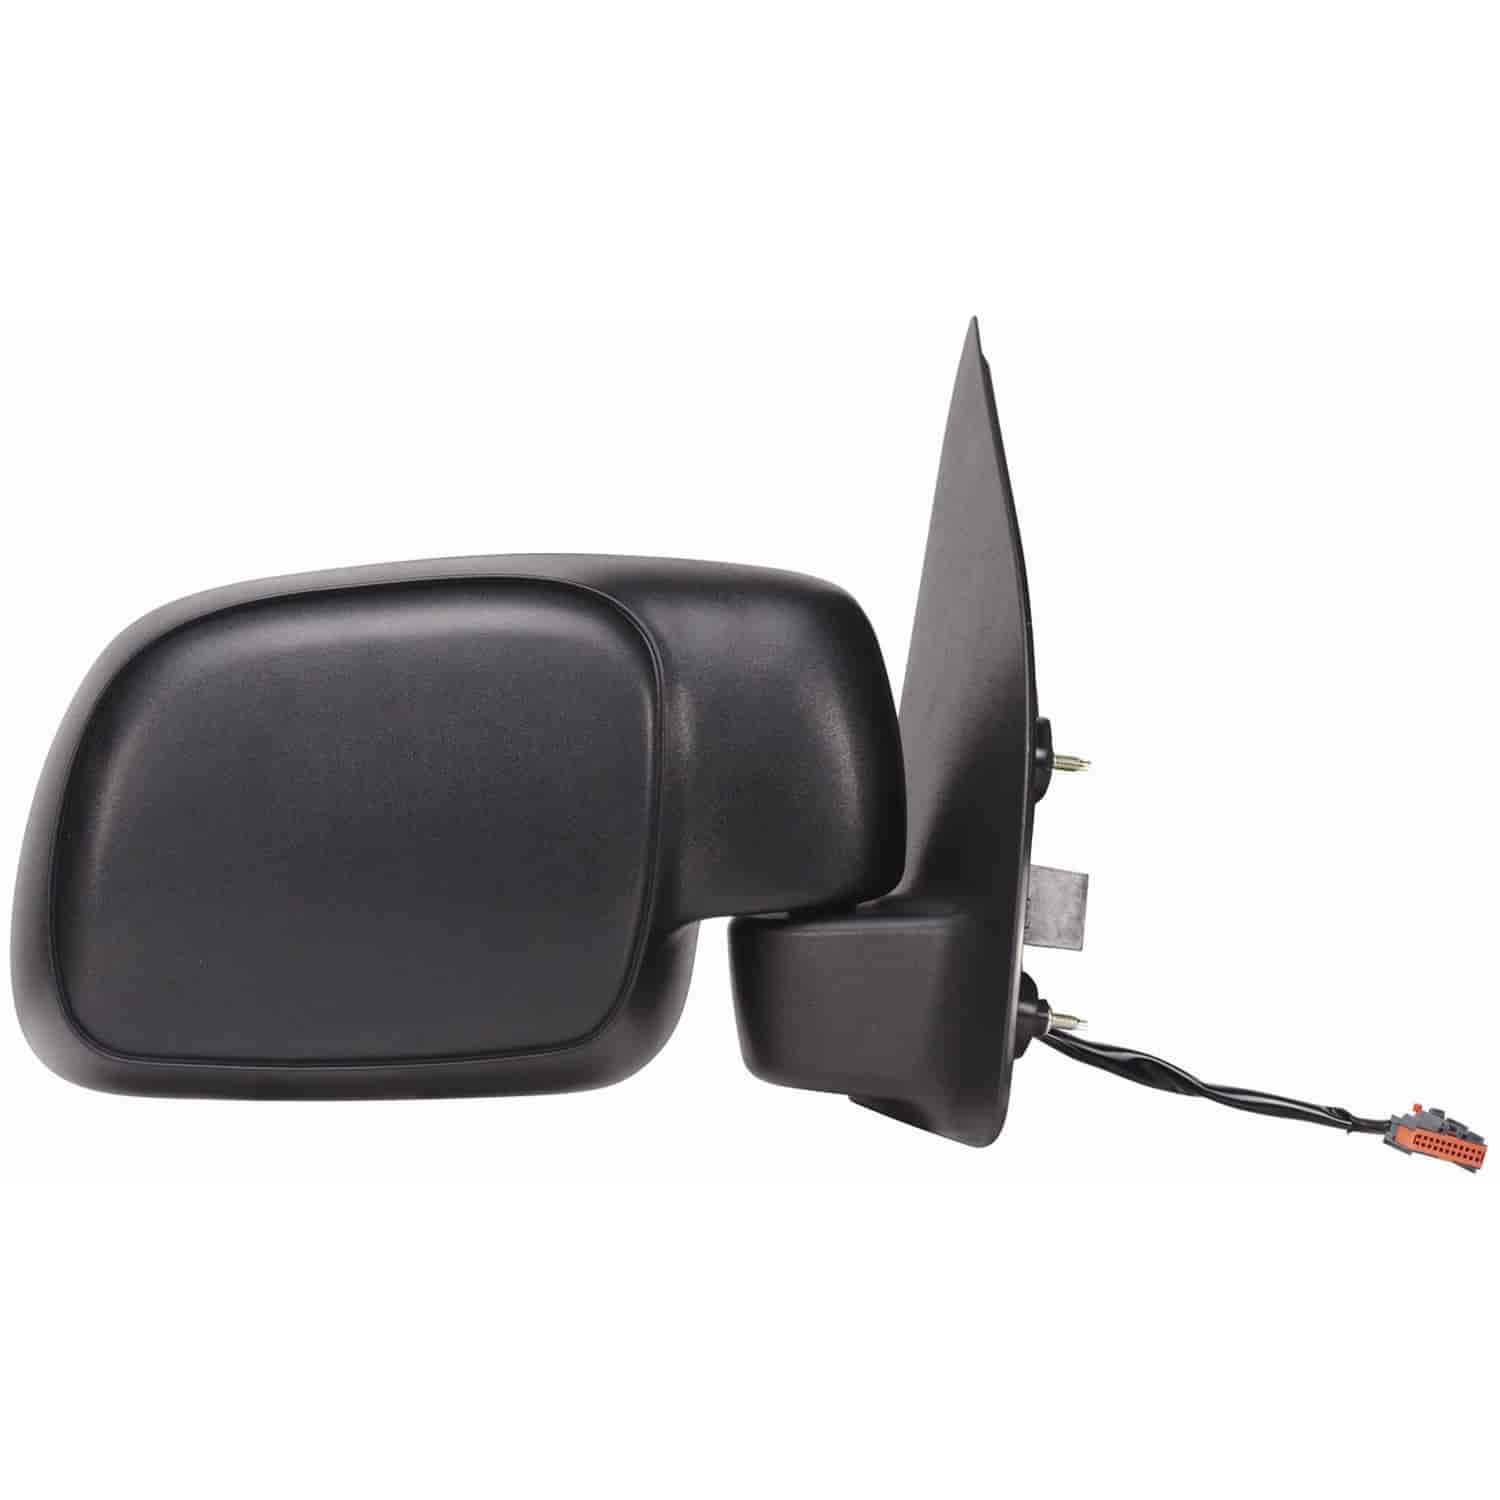 OEM Style Replacement mirror for 08-11 Ford F250/ F350/ F450/ F550 Super Duty Pick-Up passenger side